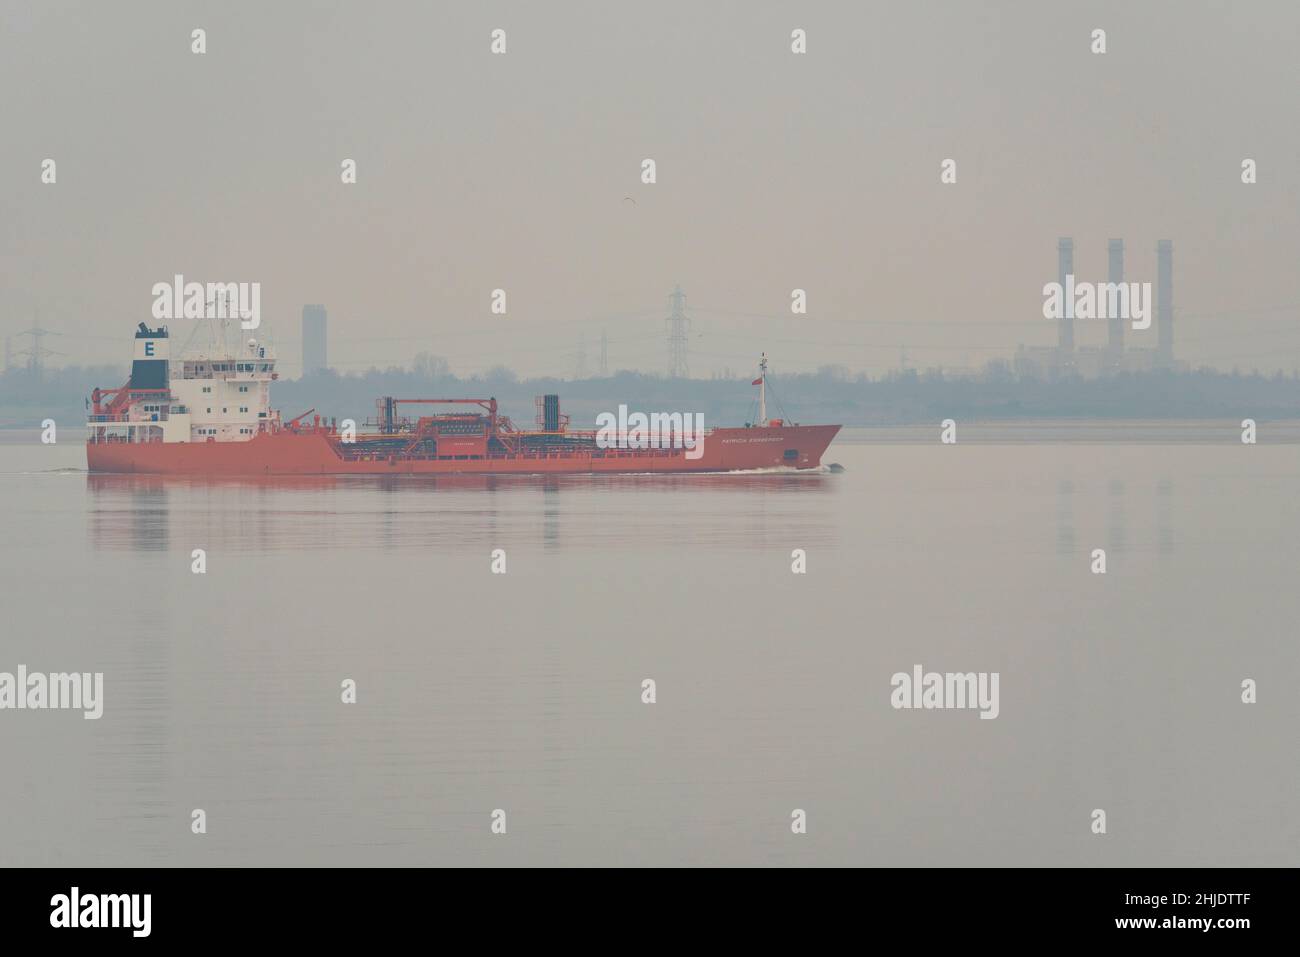 Patricia Essberger Oil, chemical Tanker on the Thames Estuary passing Southend on Sea, Essex, heading to Dagenham on a foggy grey morning Stock Photo